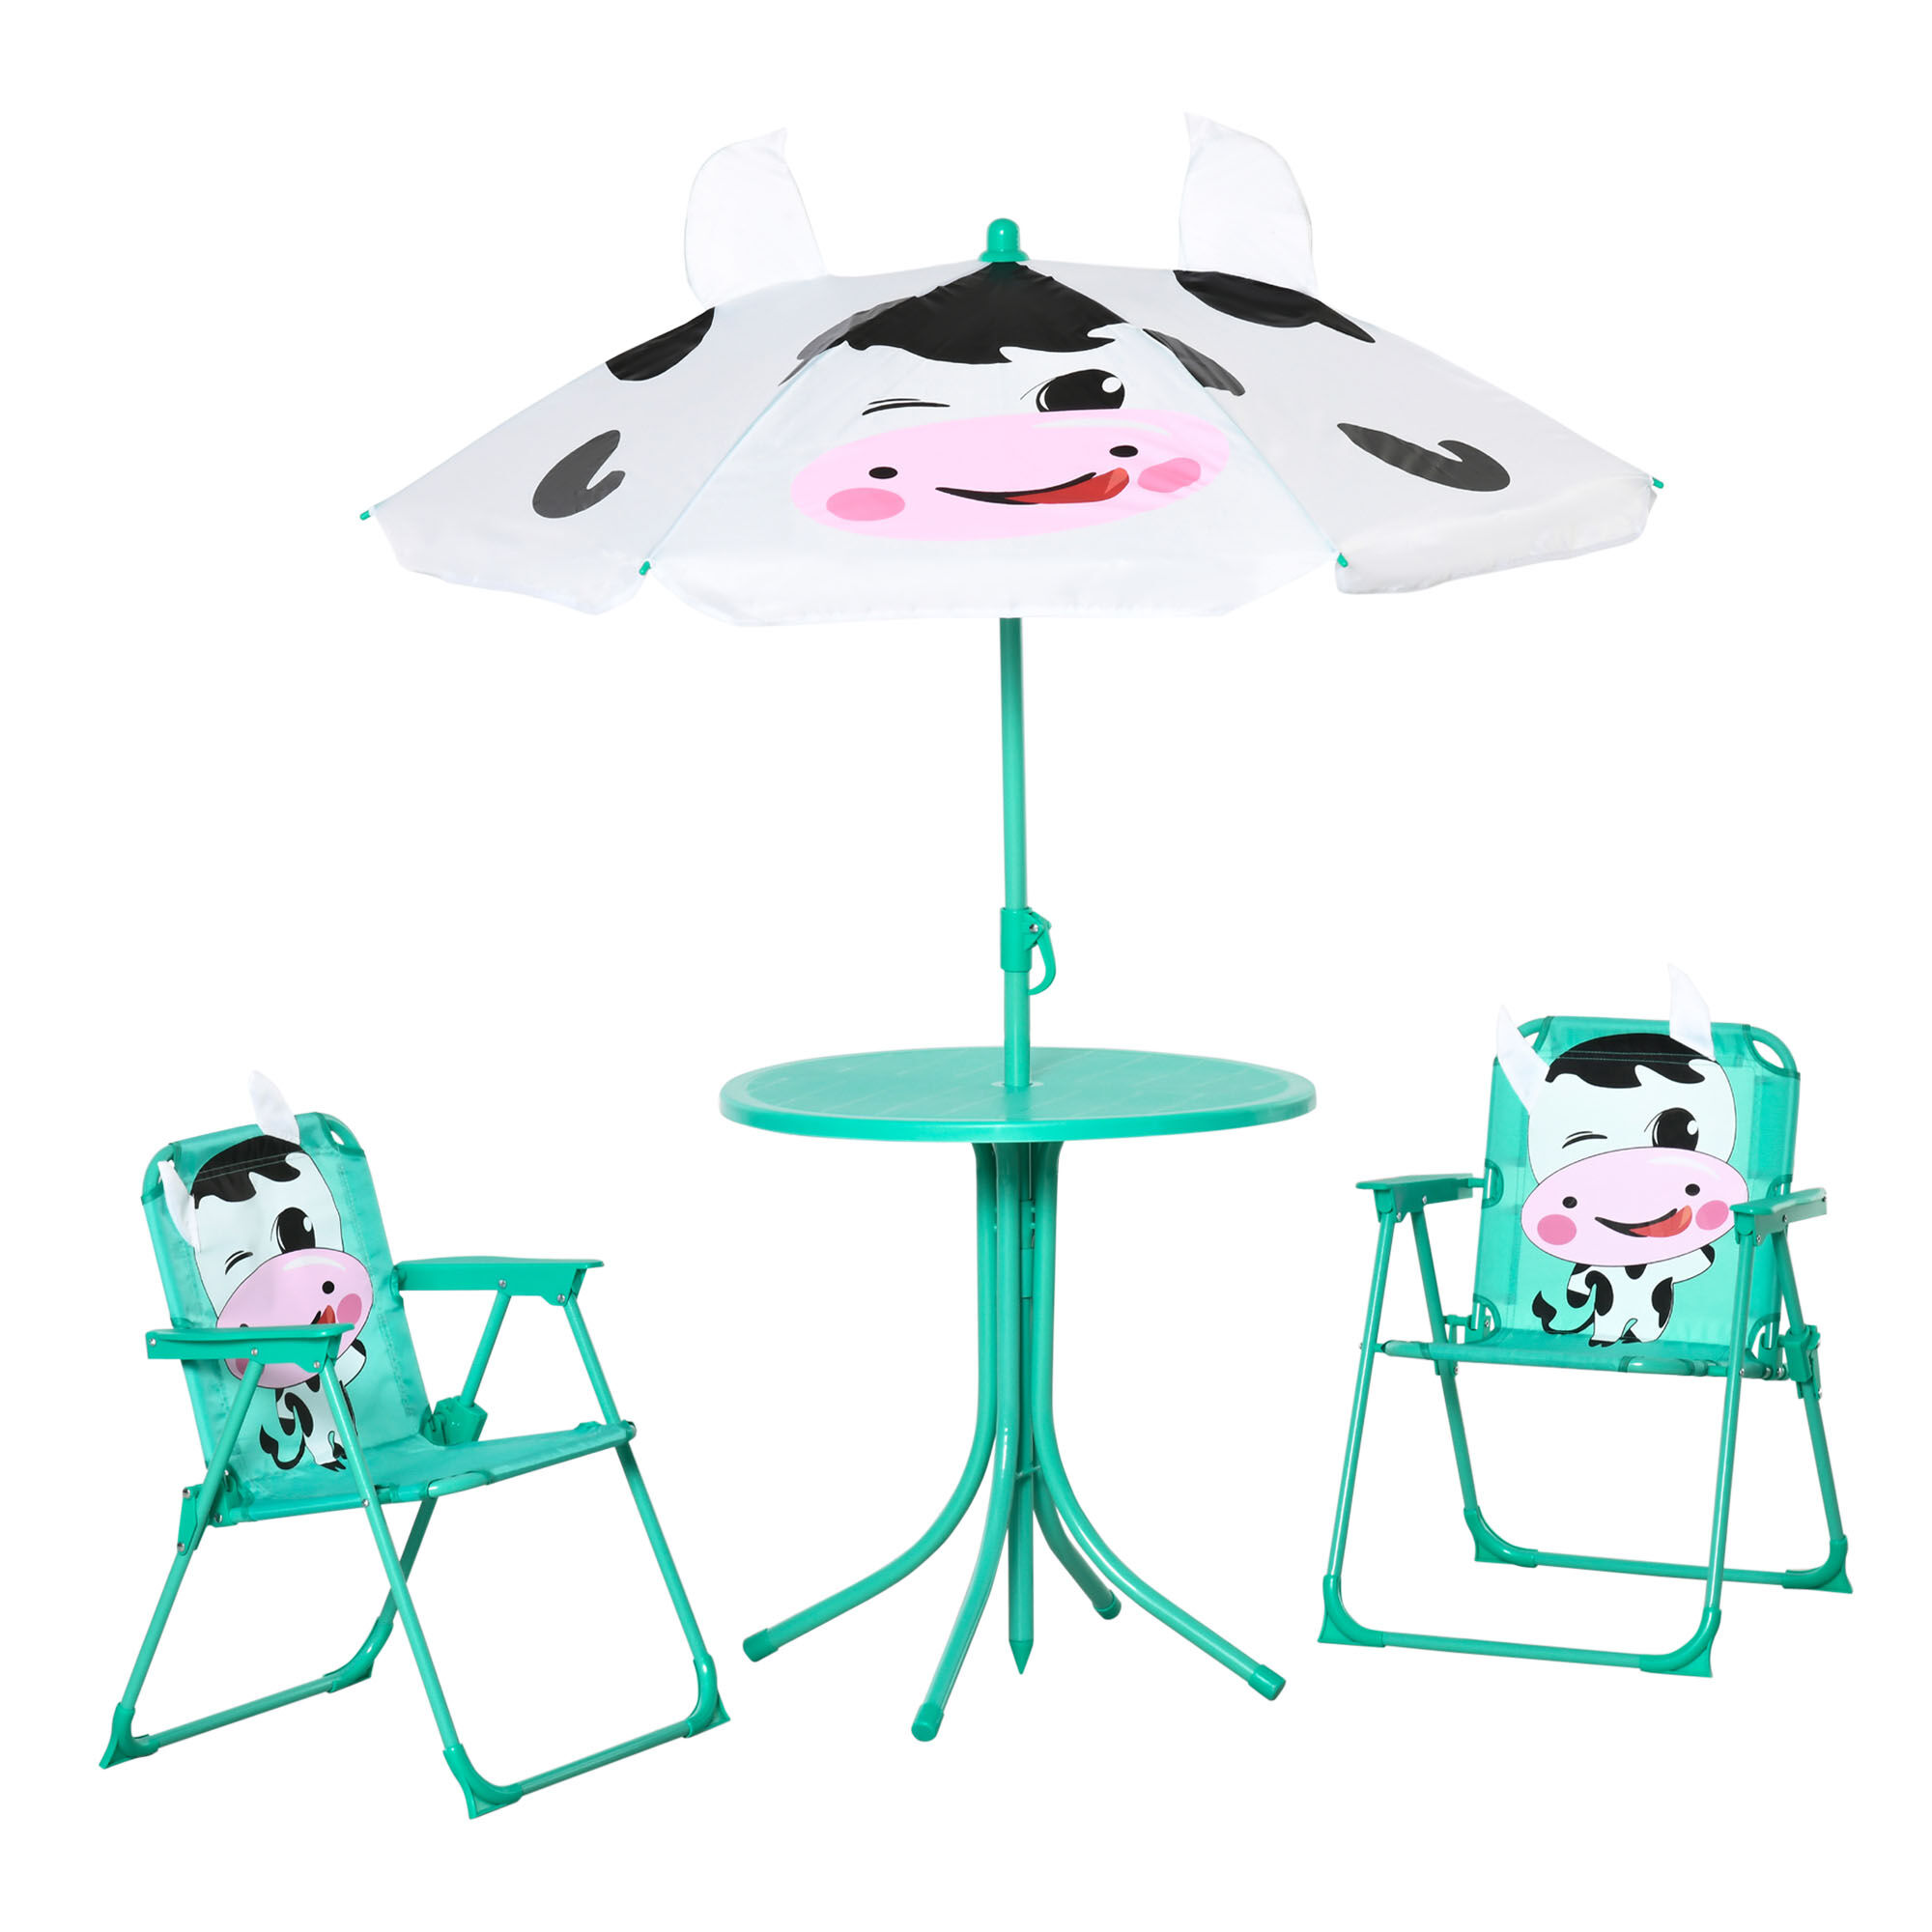 Outsunny Kids Table and Chair Set, Outdoor Folding Garden Furniture for Patio, with Dairy Cow Pattern, Removable & Umbrella, Aged 3-6 Years Old, Green